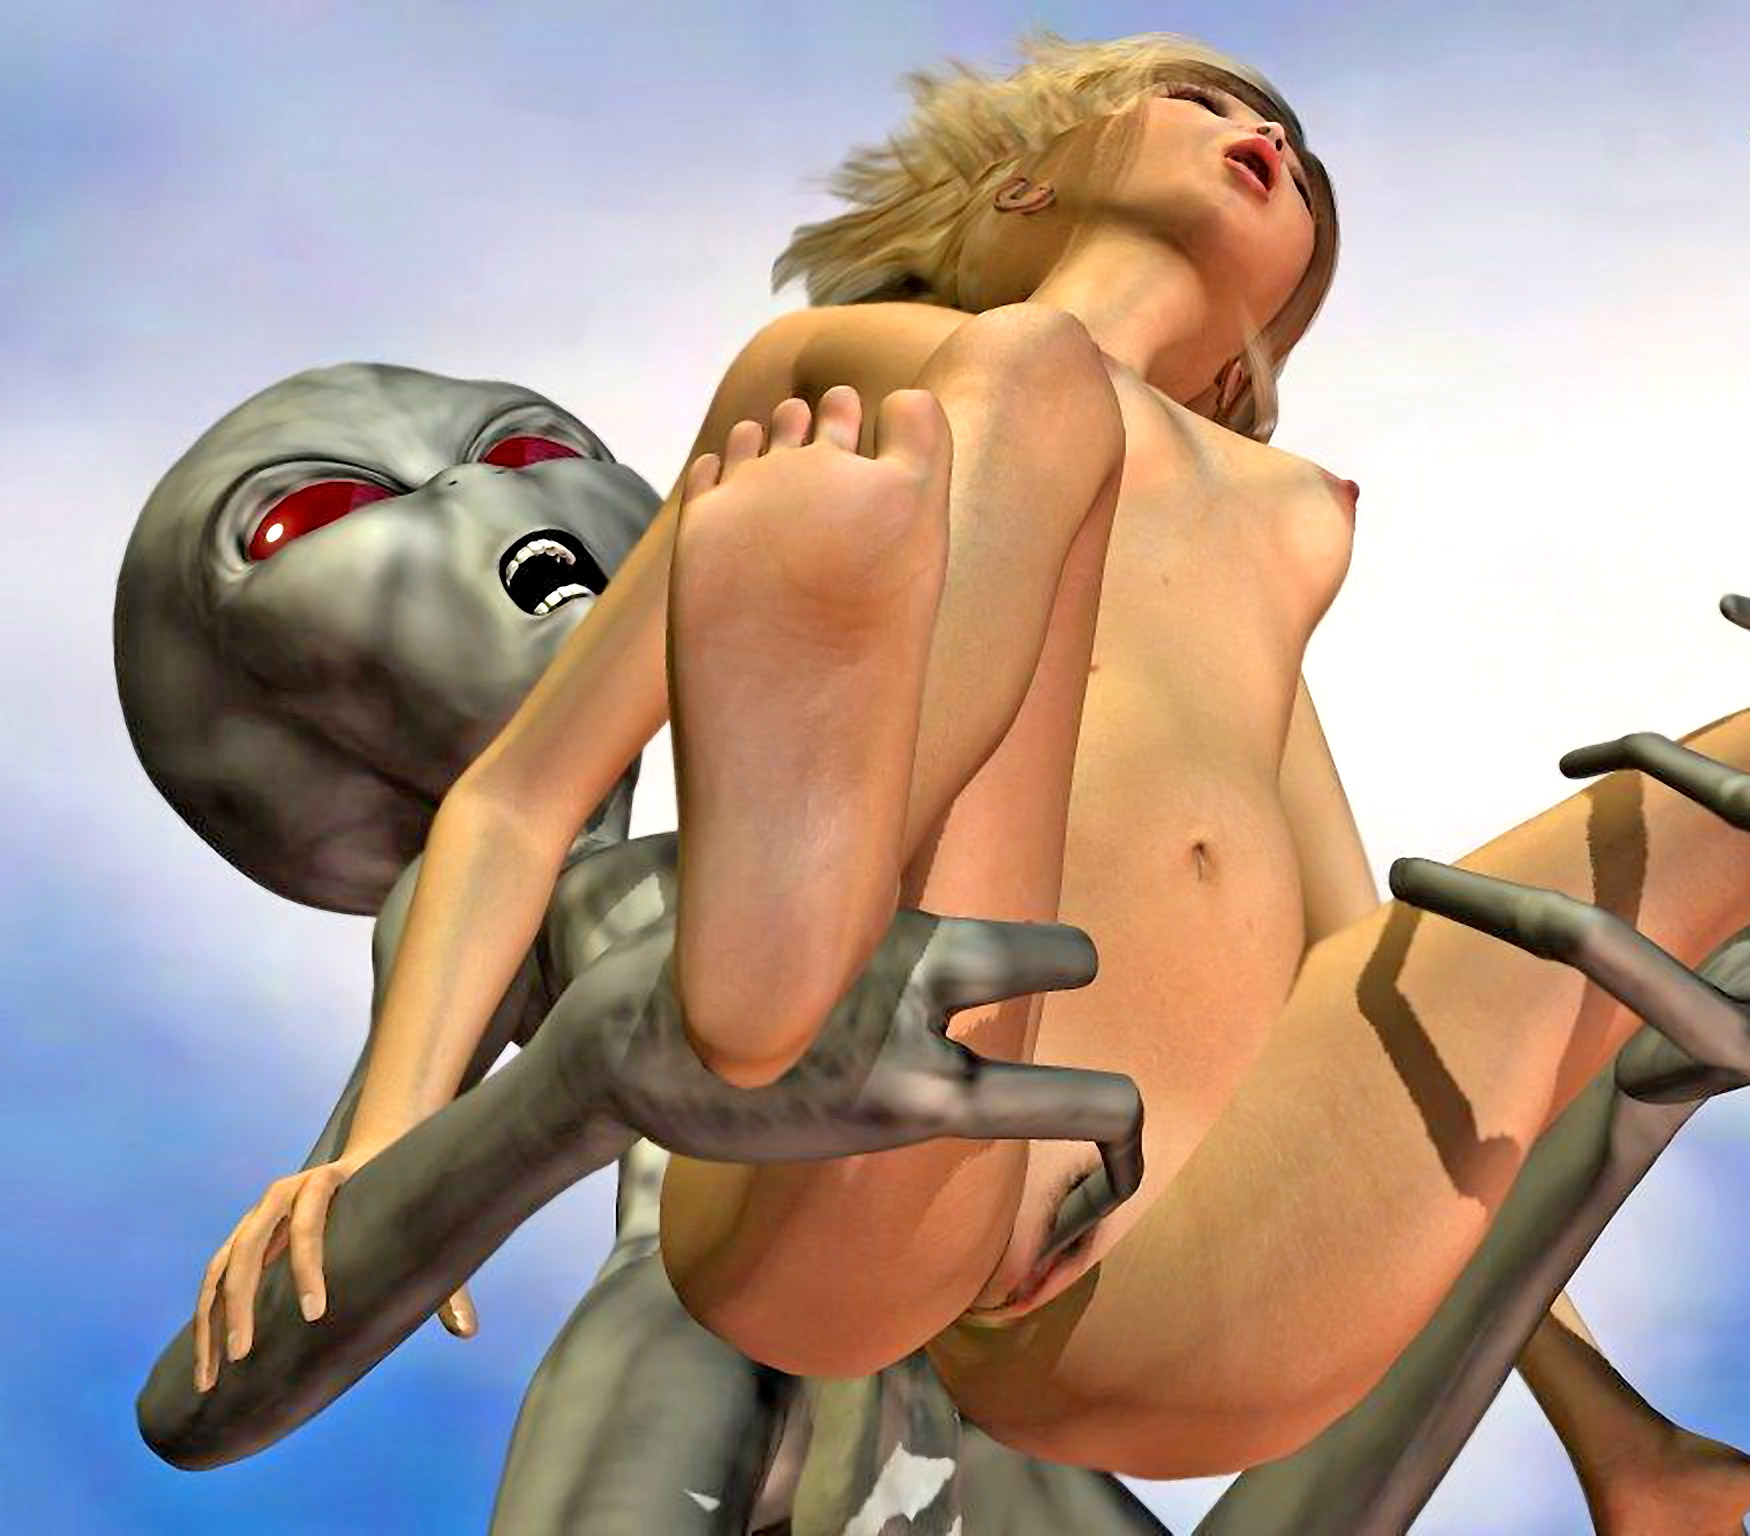 Robot And Monster Cartoon Sex - The everlasting cock riding adventures of ultra horny 3D girls at  Hd3dMonsterSex.com